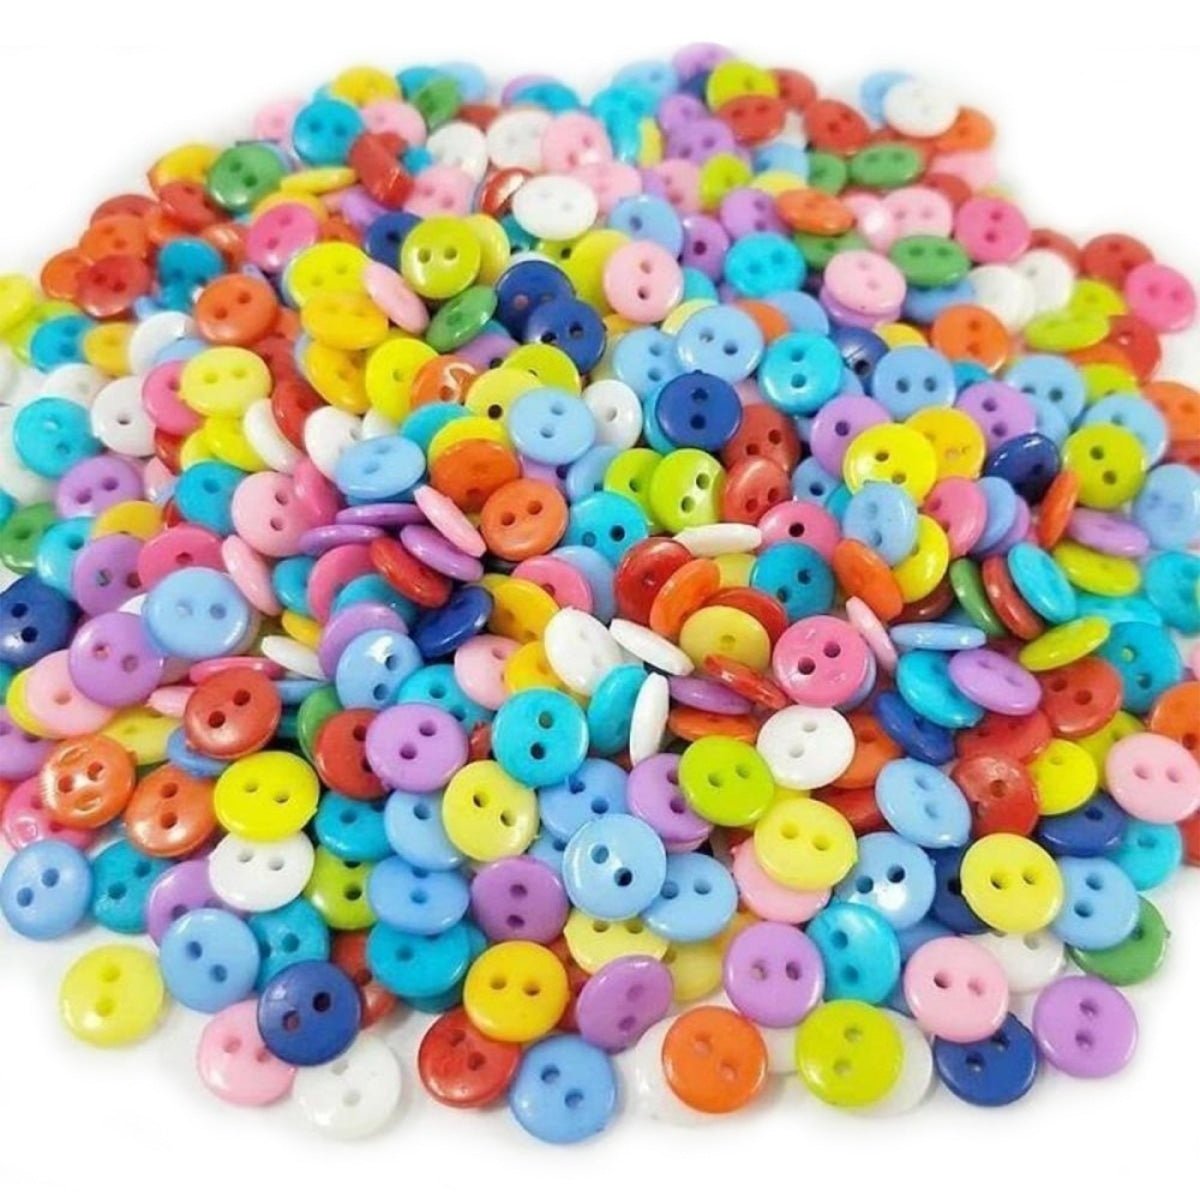 100pcs 2 Hole Children's Baby's Clothing Buttons 7.5mm Round Colourful - Asia Sell